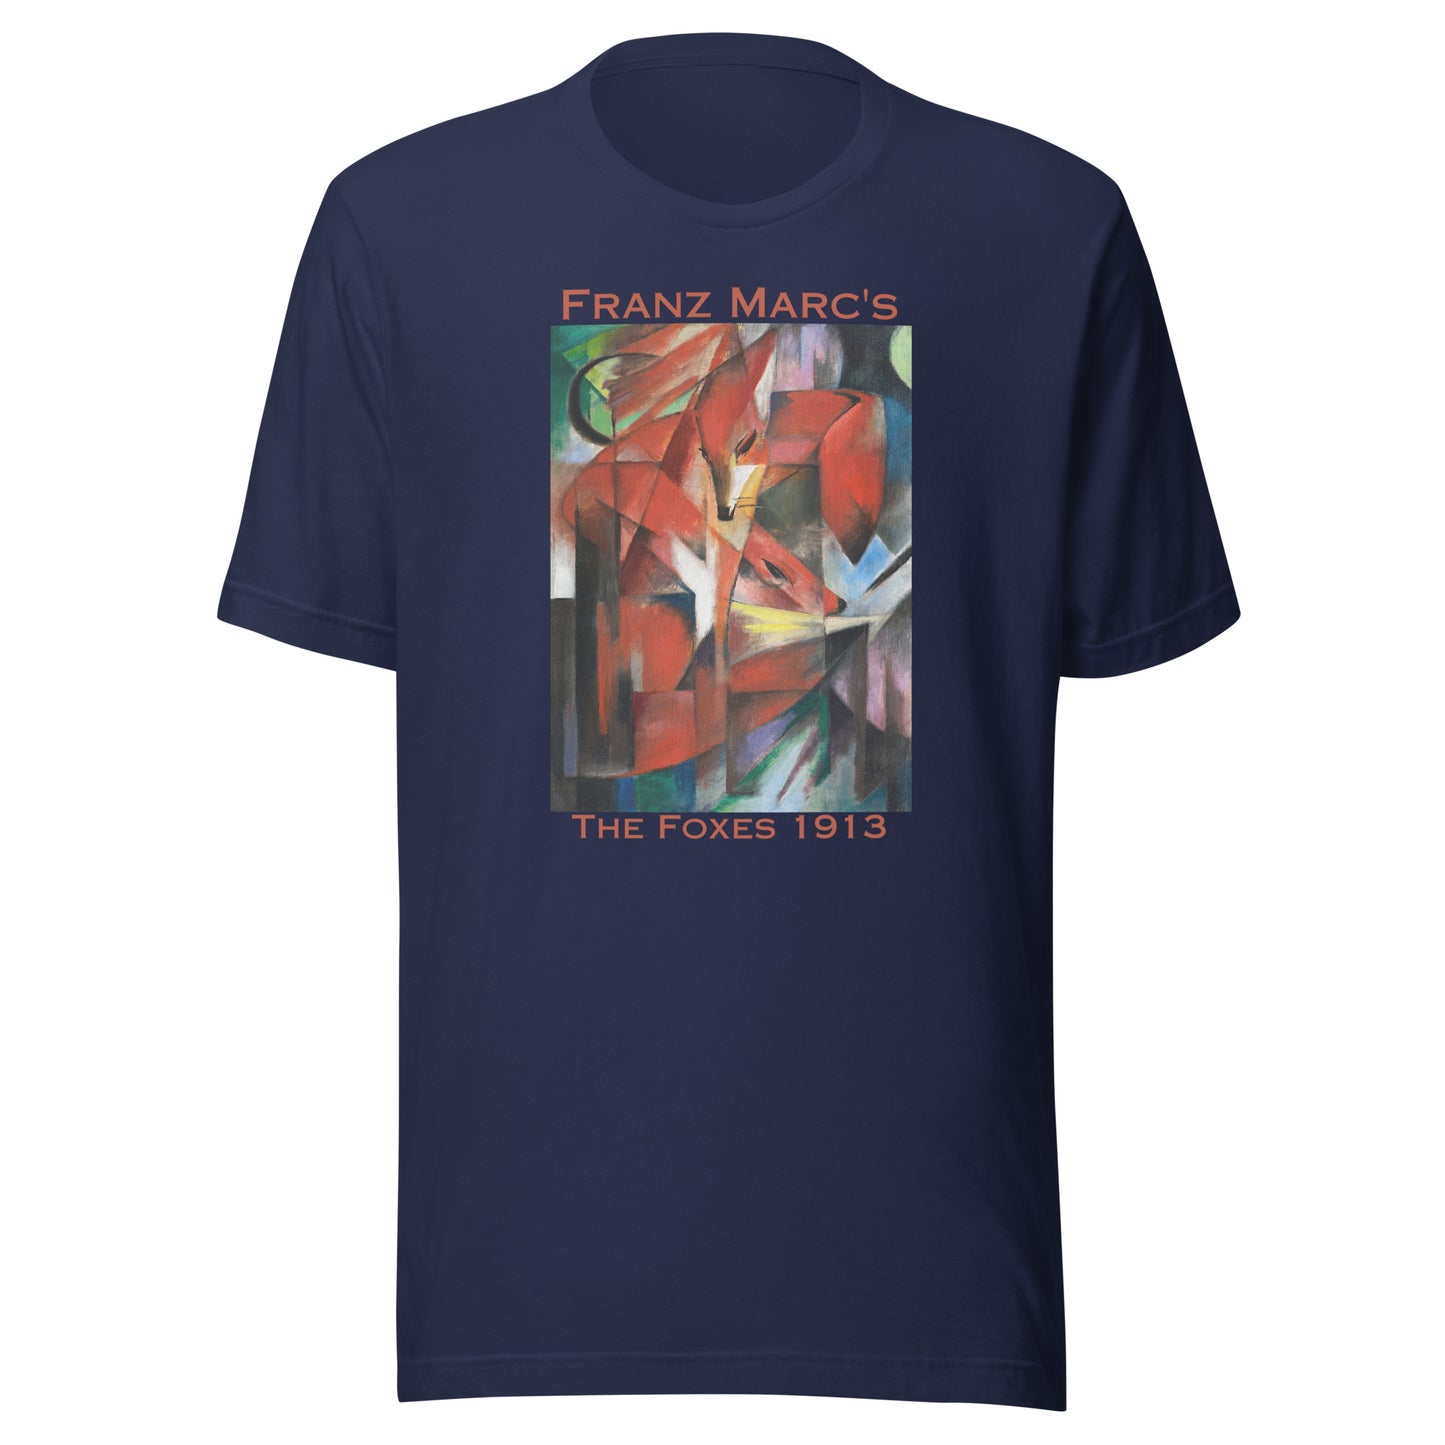 Unisex t-shirt with Franz Marc's famous painting "Foxes" (1913)